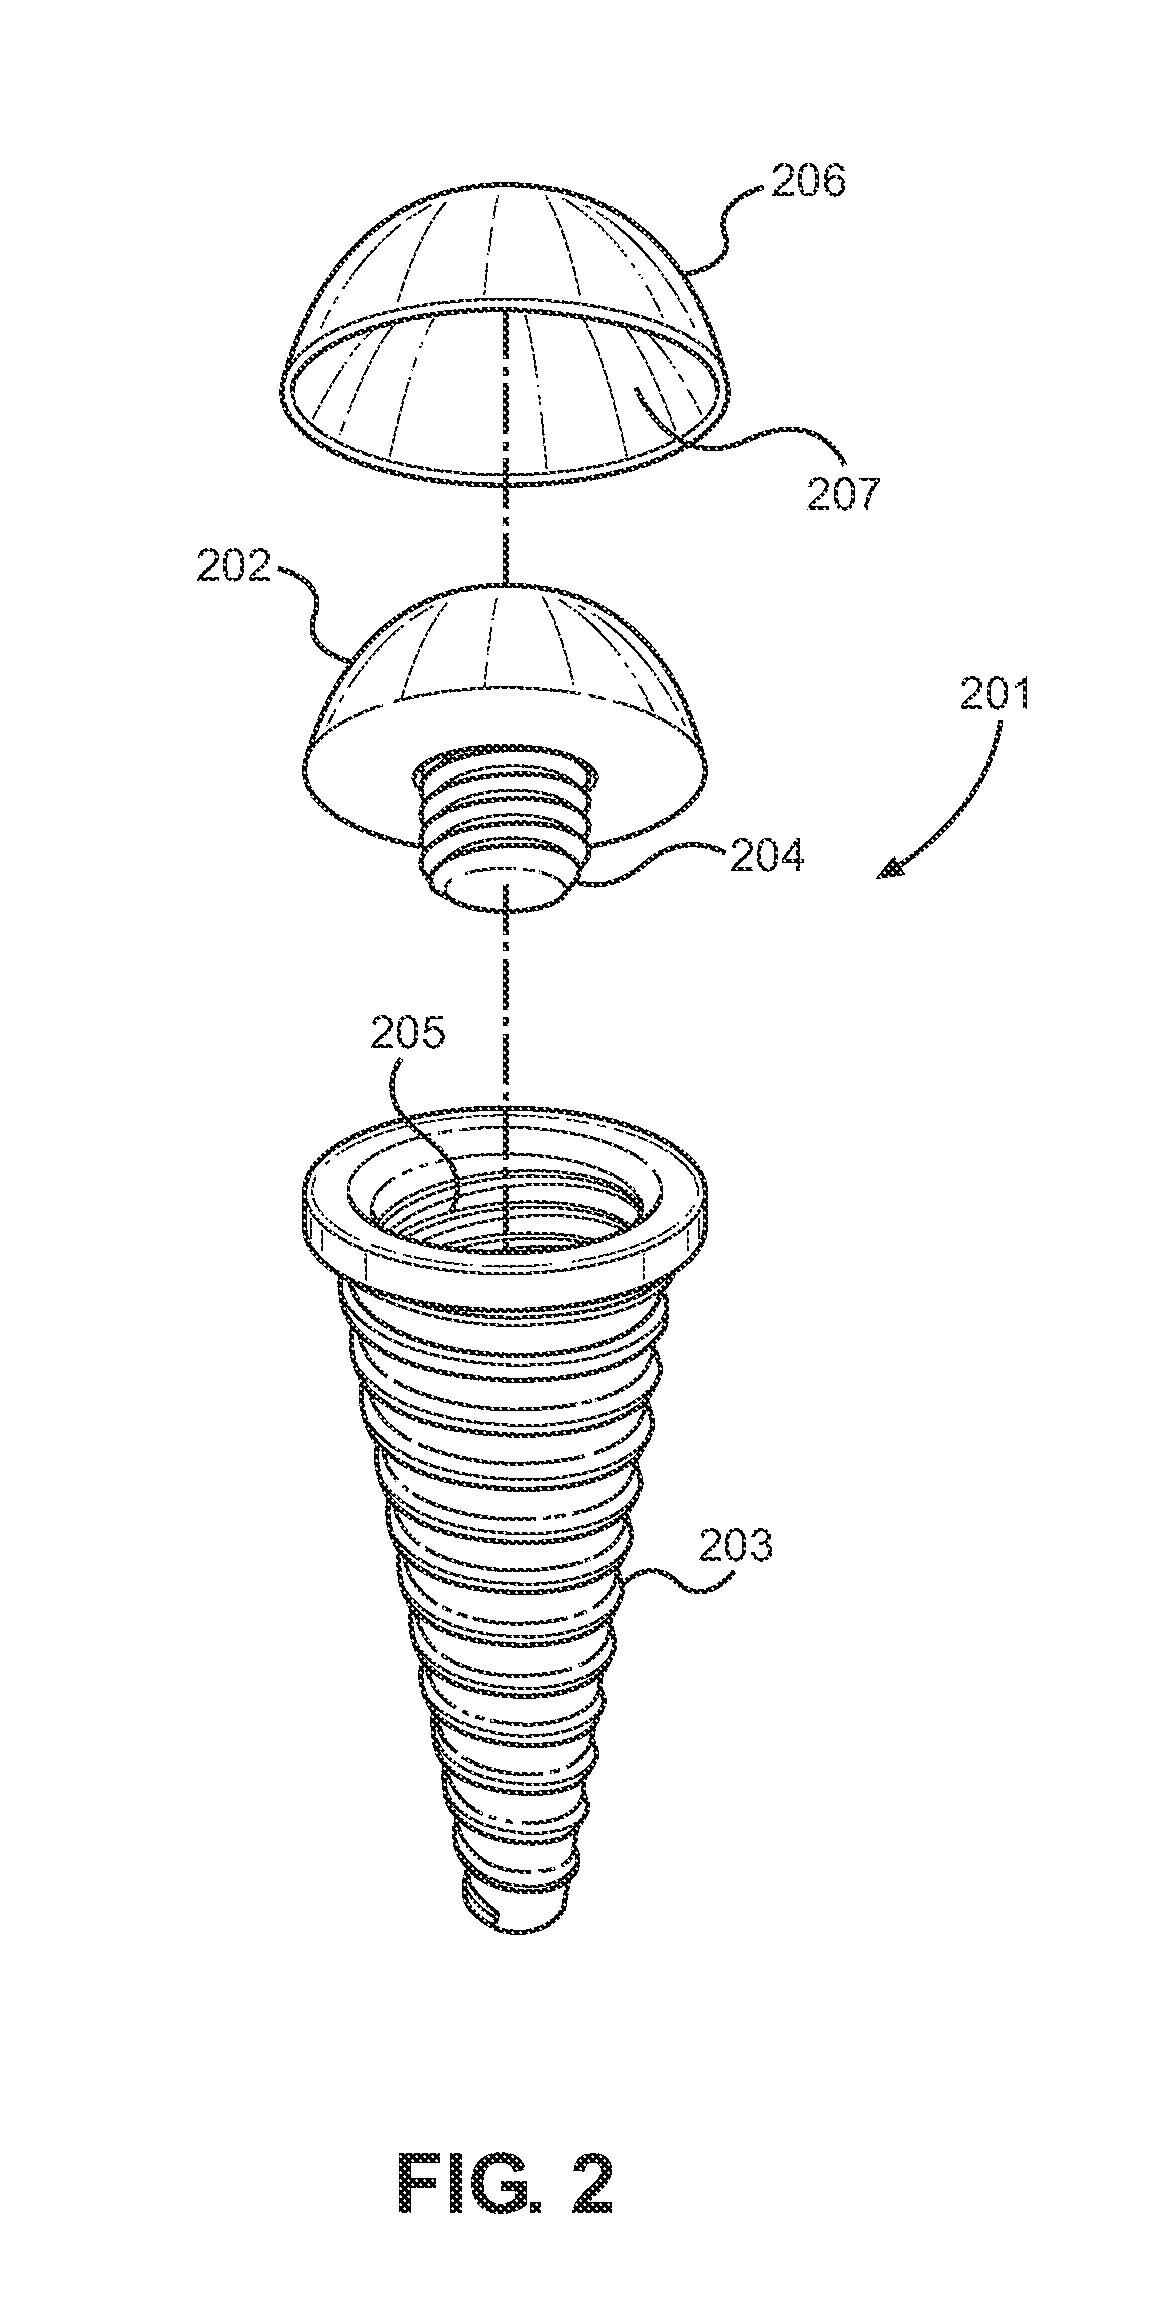 System and Method of Installing Dental Prostheses for Passively Influencing Tongue Position to Reduce Airway Obstruction